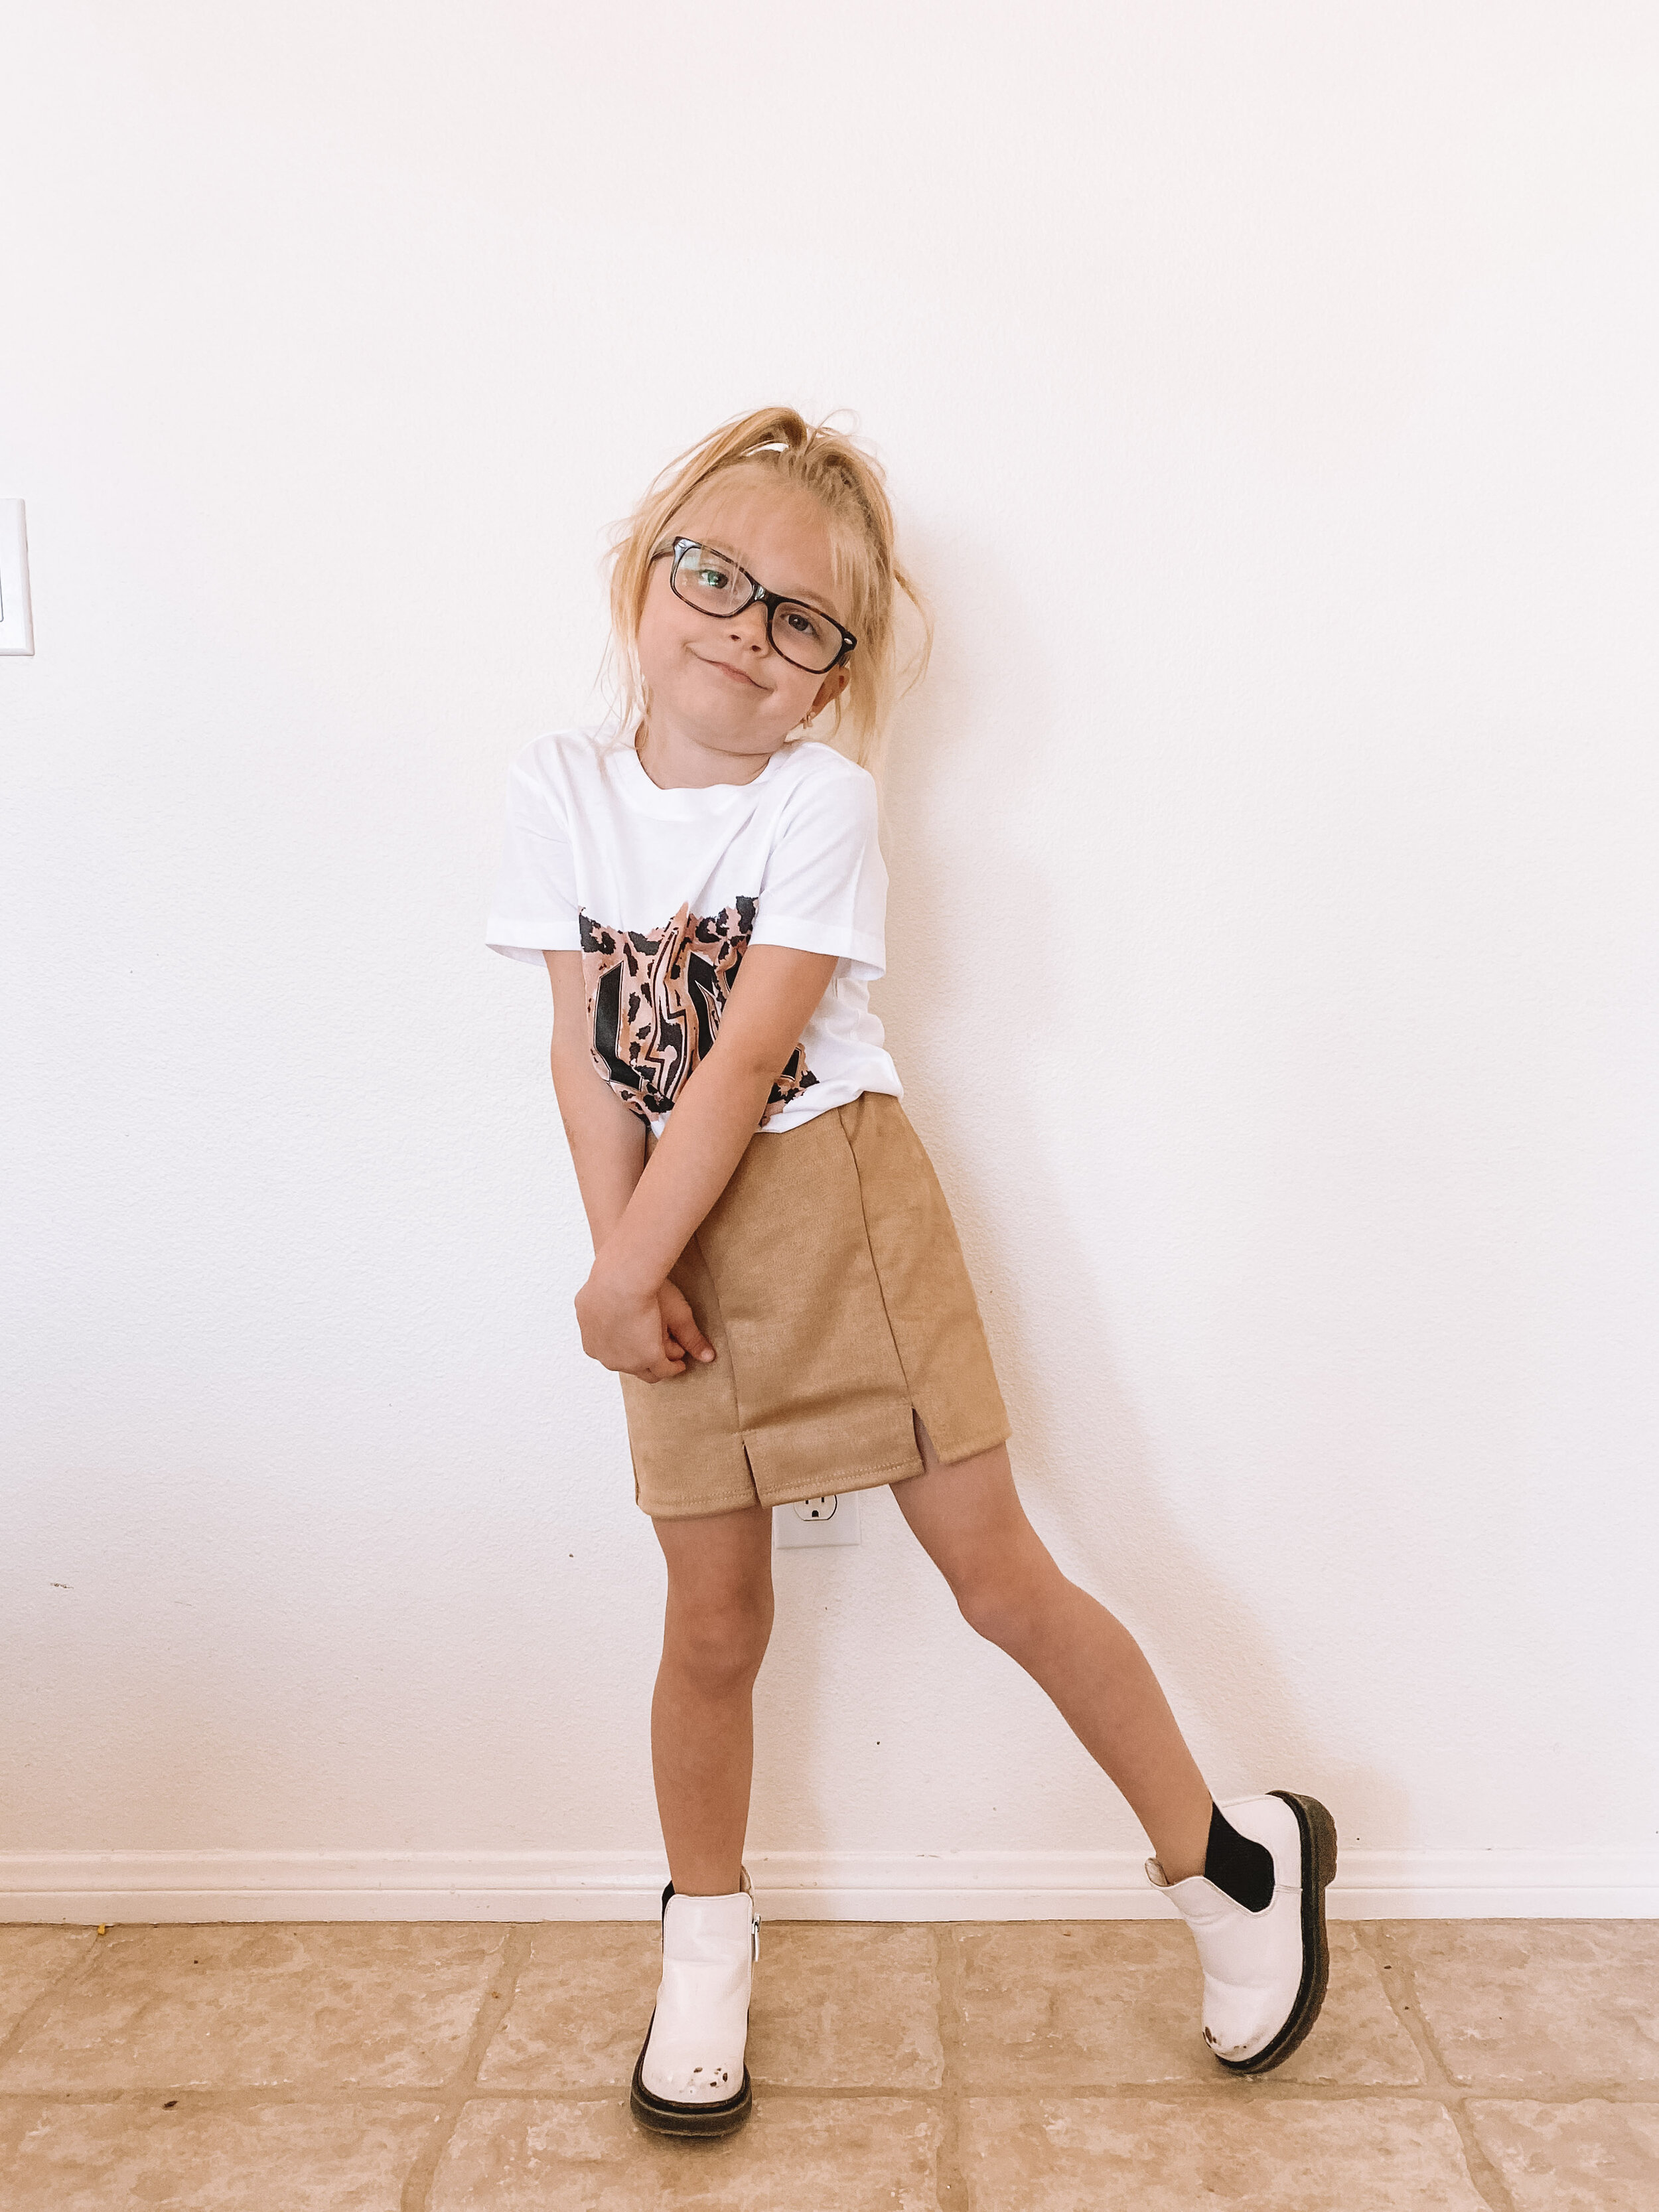 Cute Kids Skirt - Mommy and Me Matching Clothes